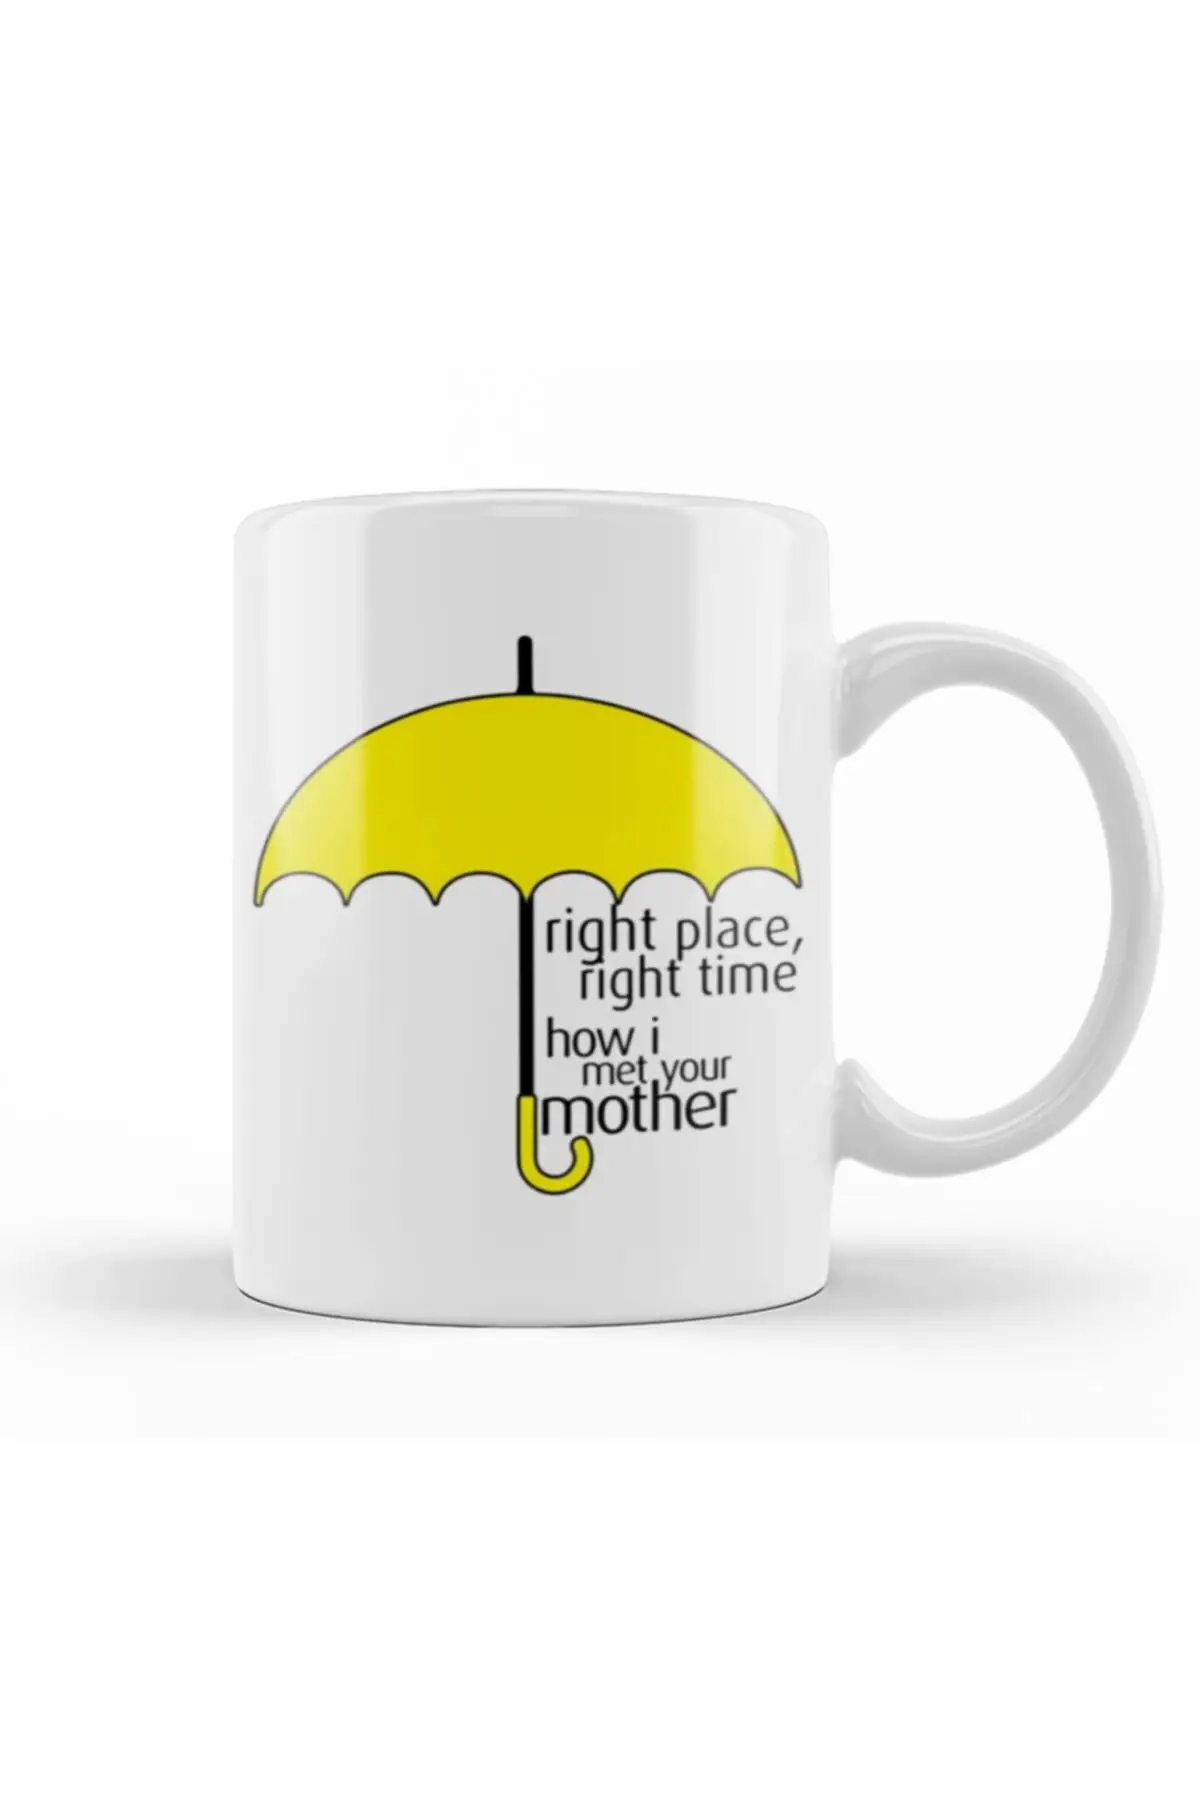 

Umbrella Design Porcelain Cups Tea and Coffee Mugs Colorful Printed Gift Items Office and Home Decoration Hot Expresso Chocolate